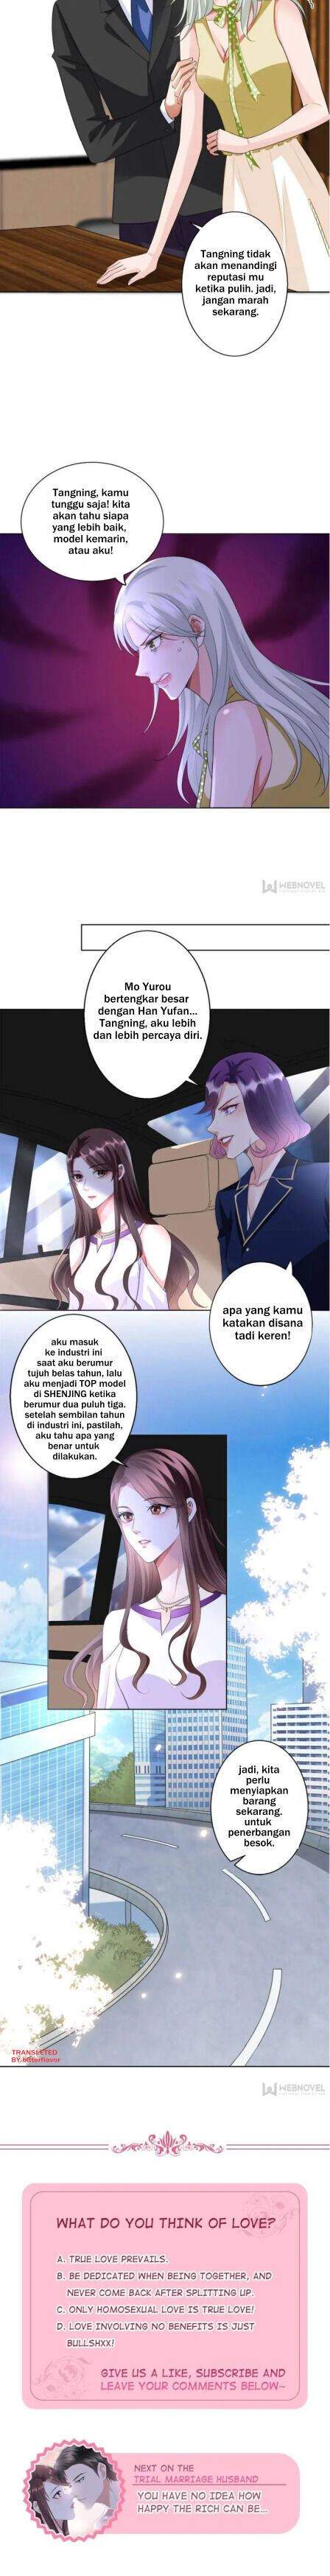 Trial Marriage Husband: Need to Work Hard Chapter 30